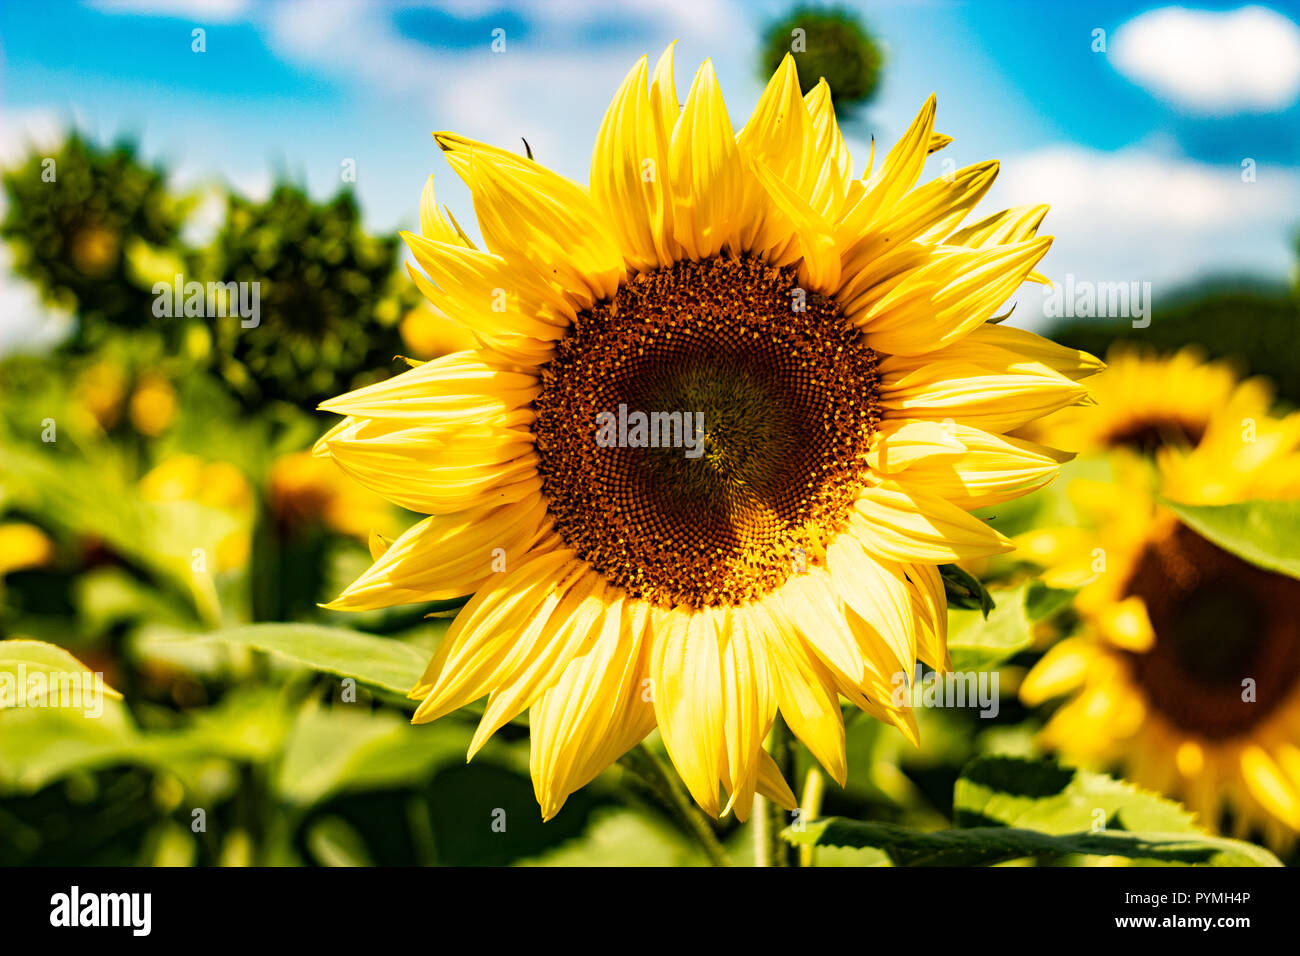 A large sunflower against a clean blue sky. Stock Photo